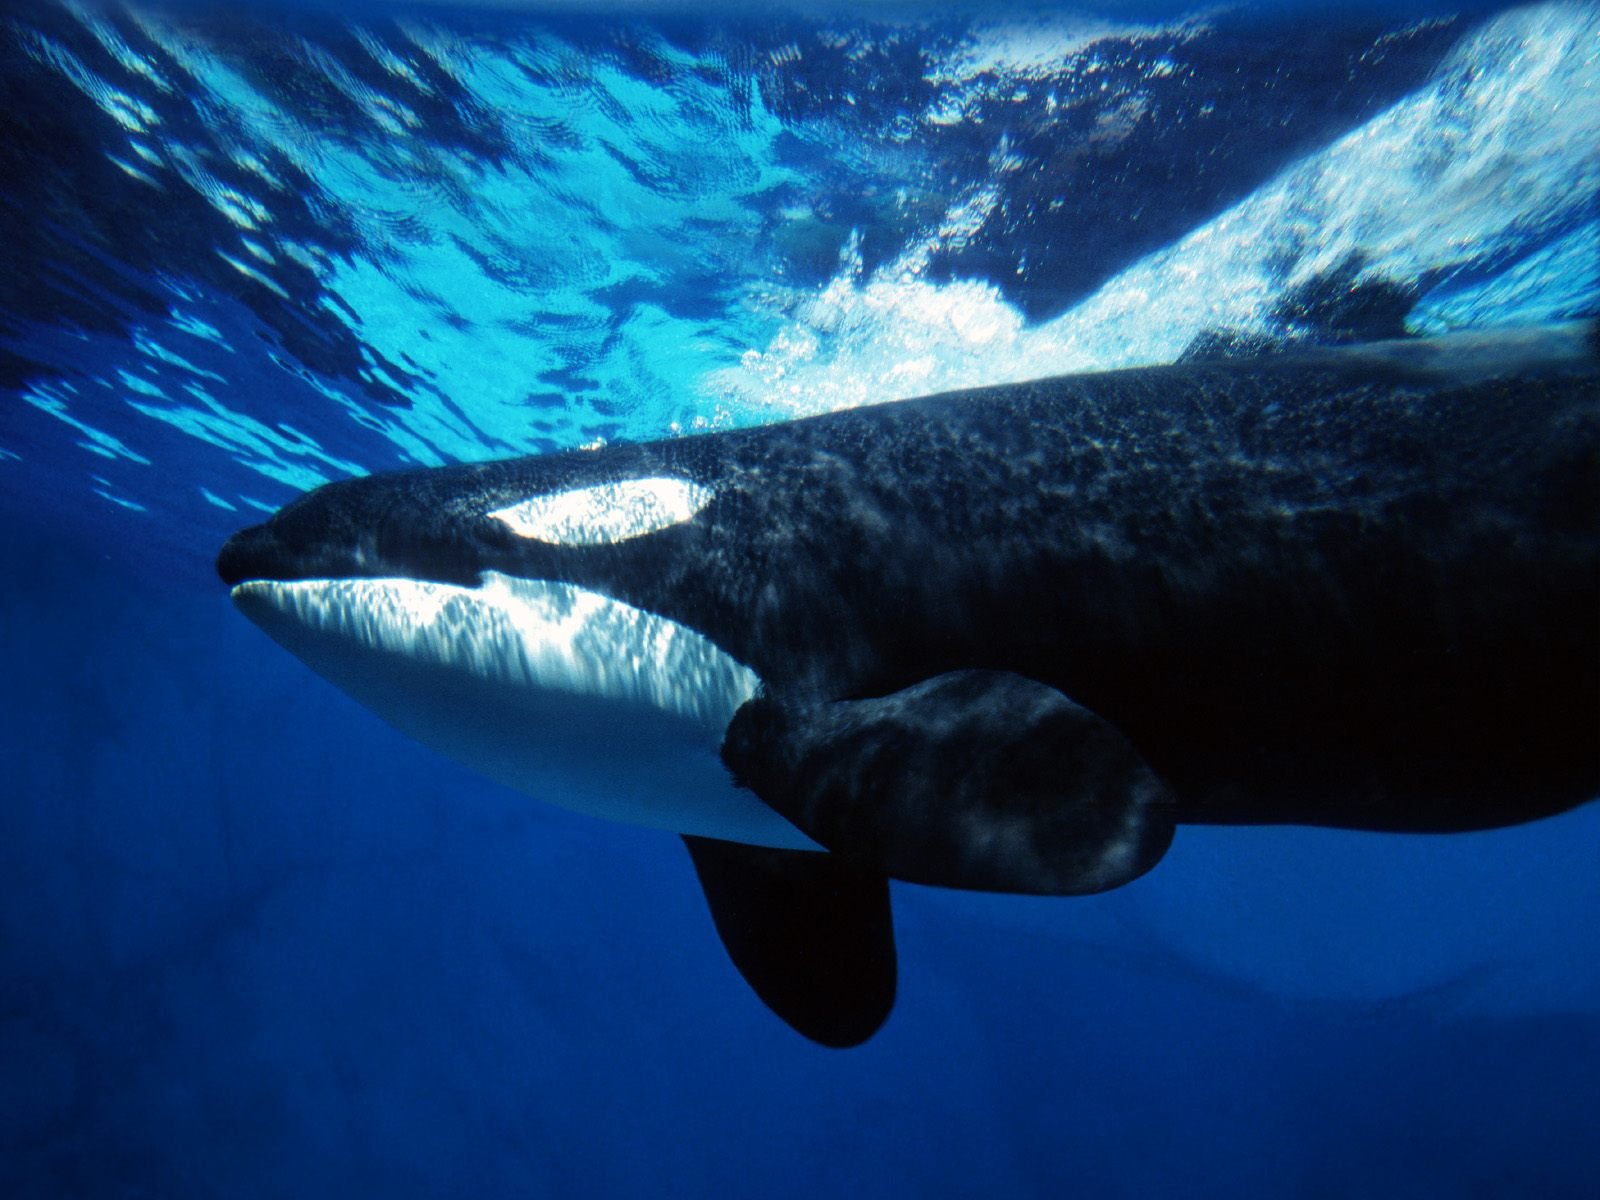 100 Free Orca  Killer Whale Images  Pixabay